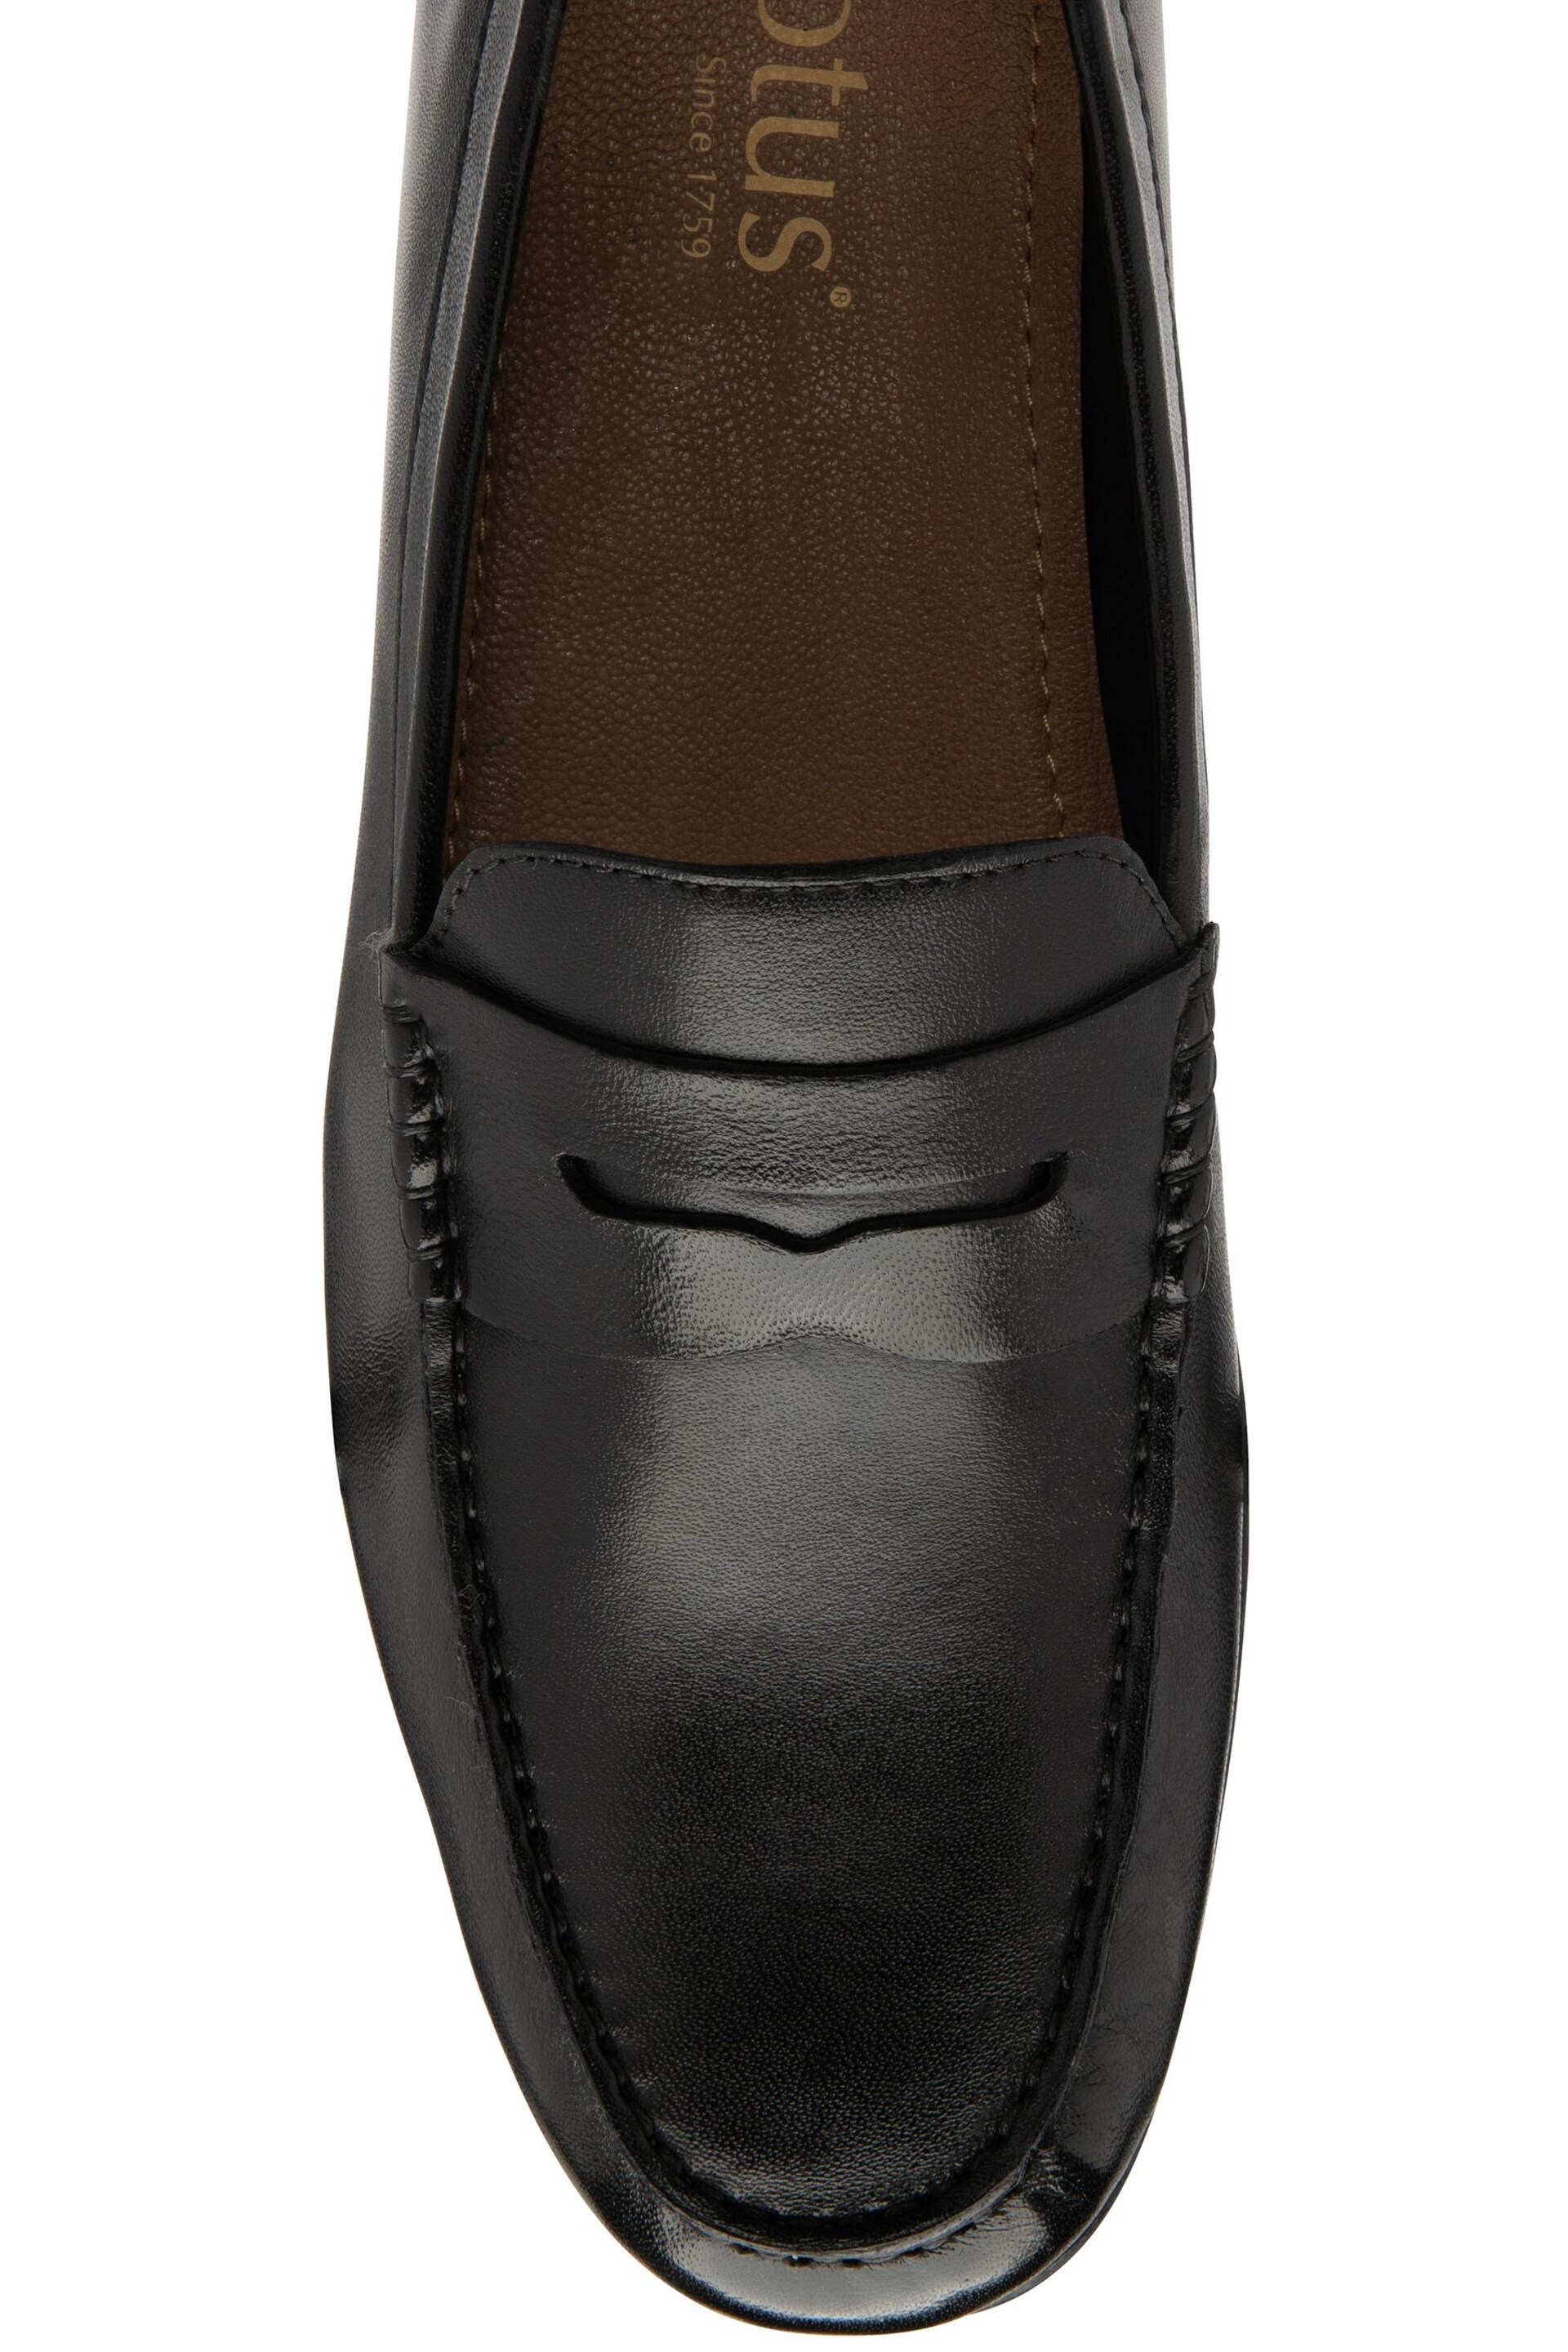 Lotus Black Leather Loafers - Image 4 of 4